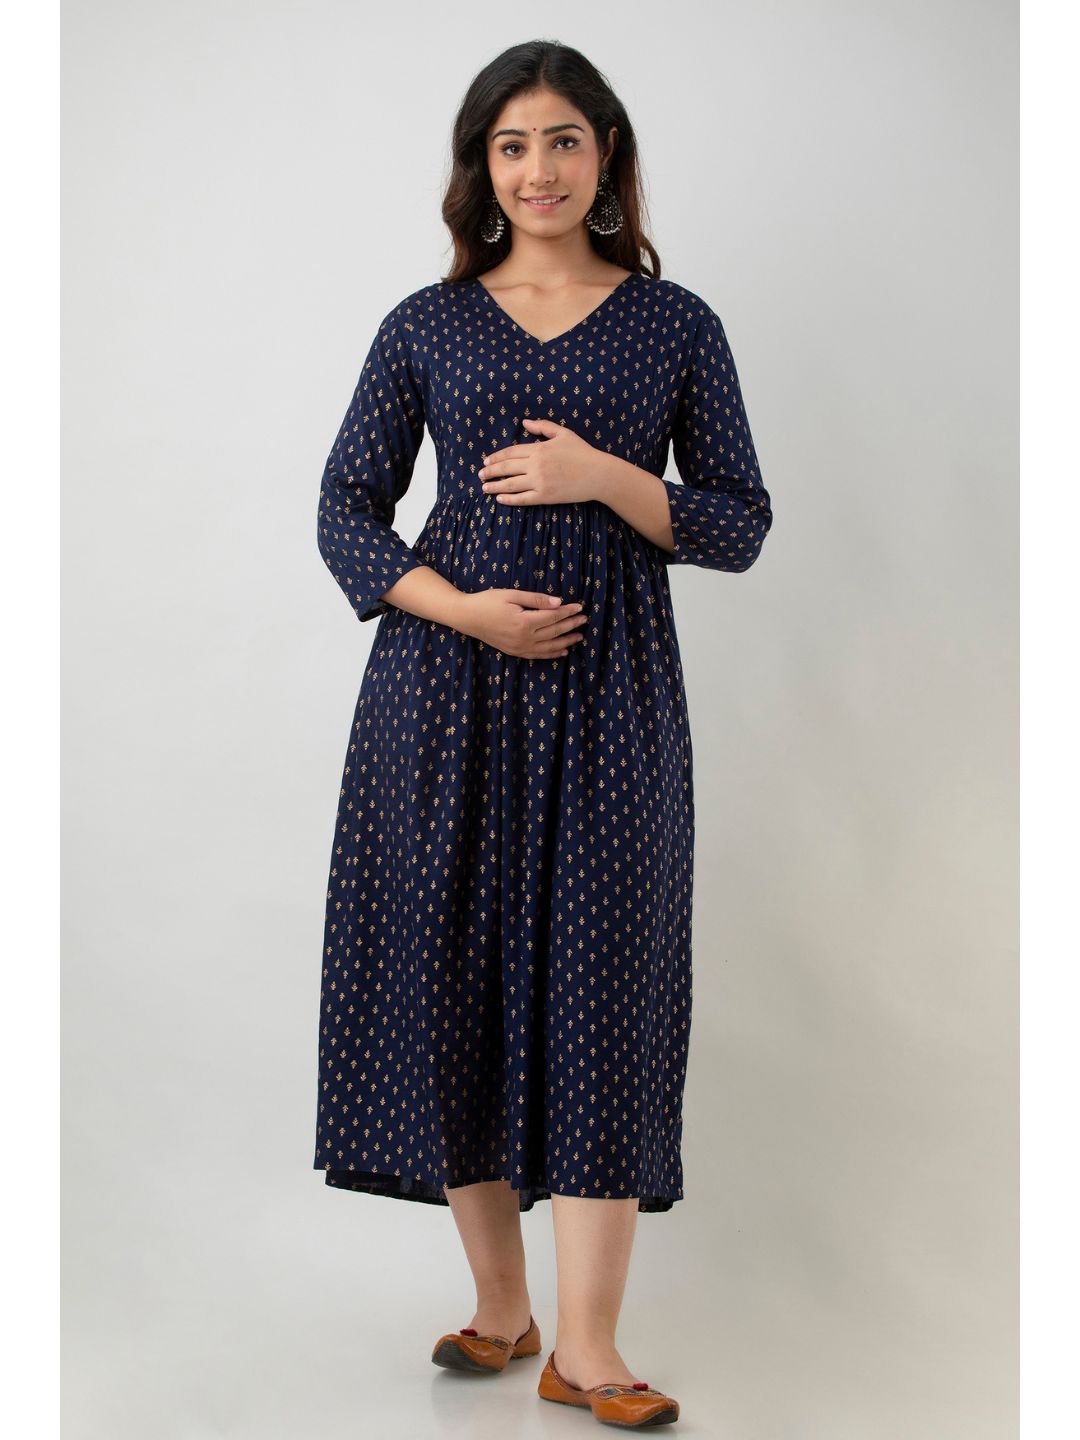 Evie Embellished Maternity Dress – Chic the Collection